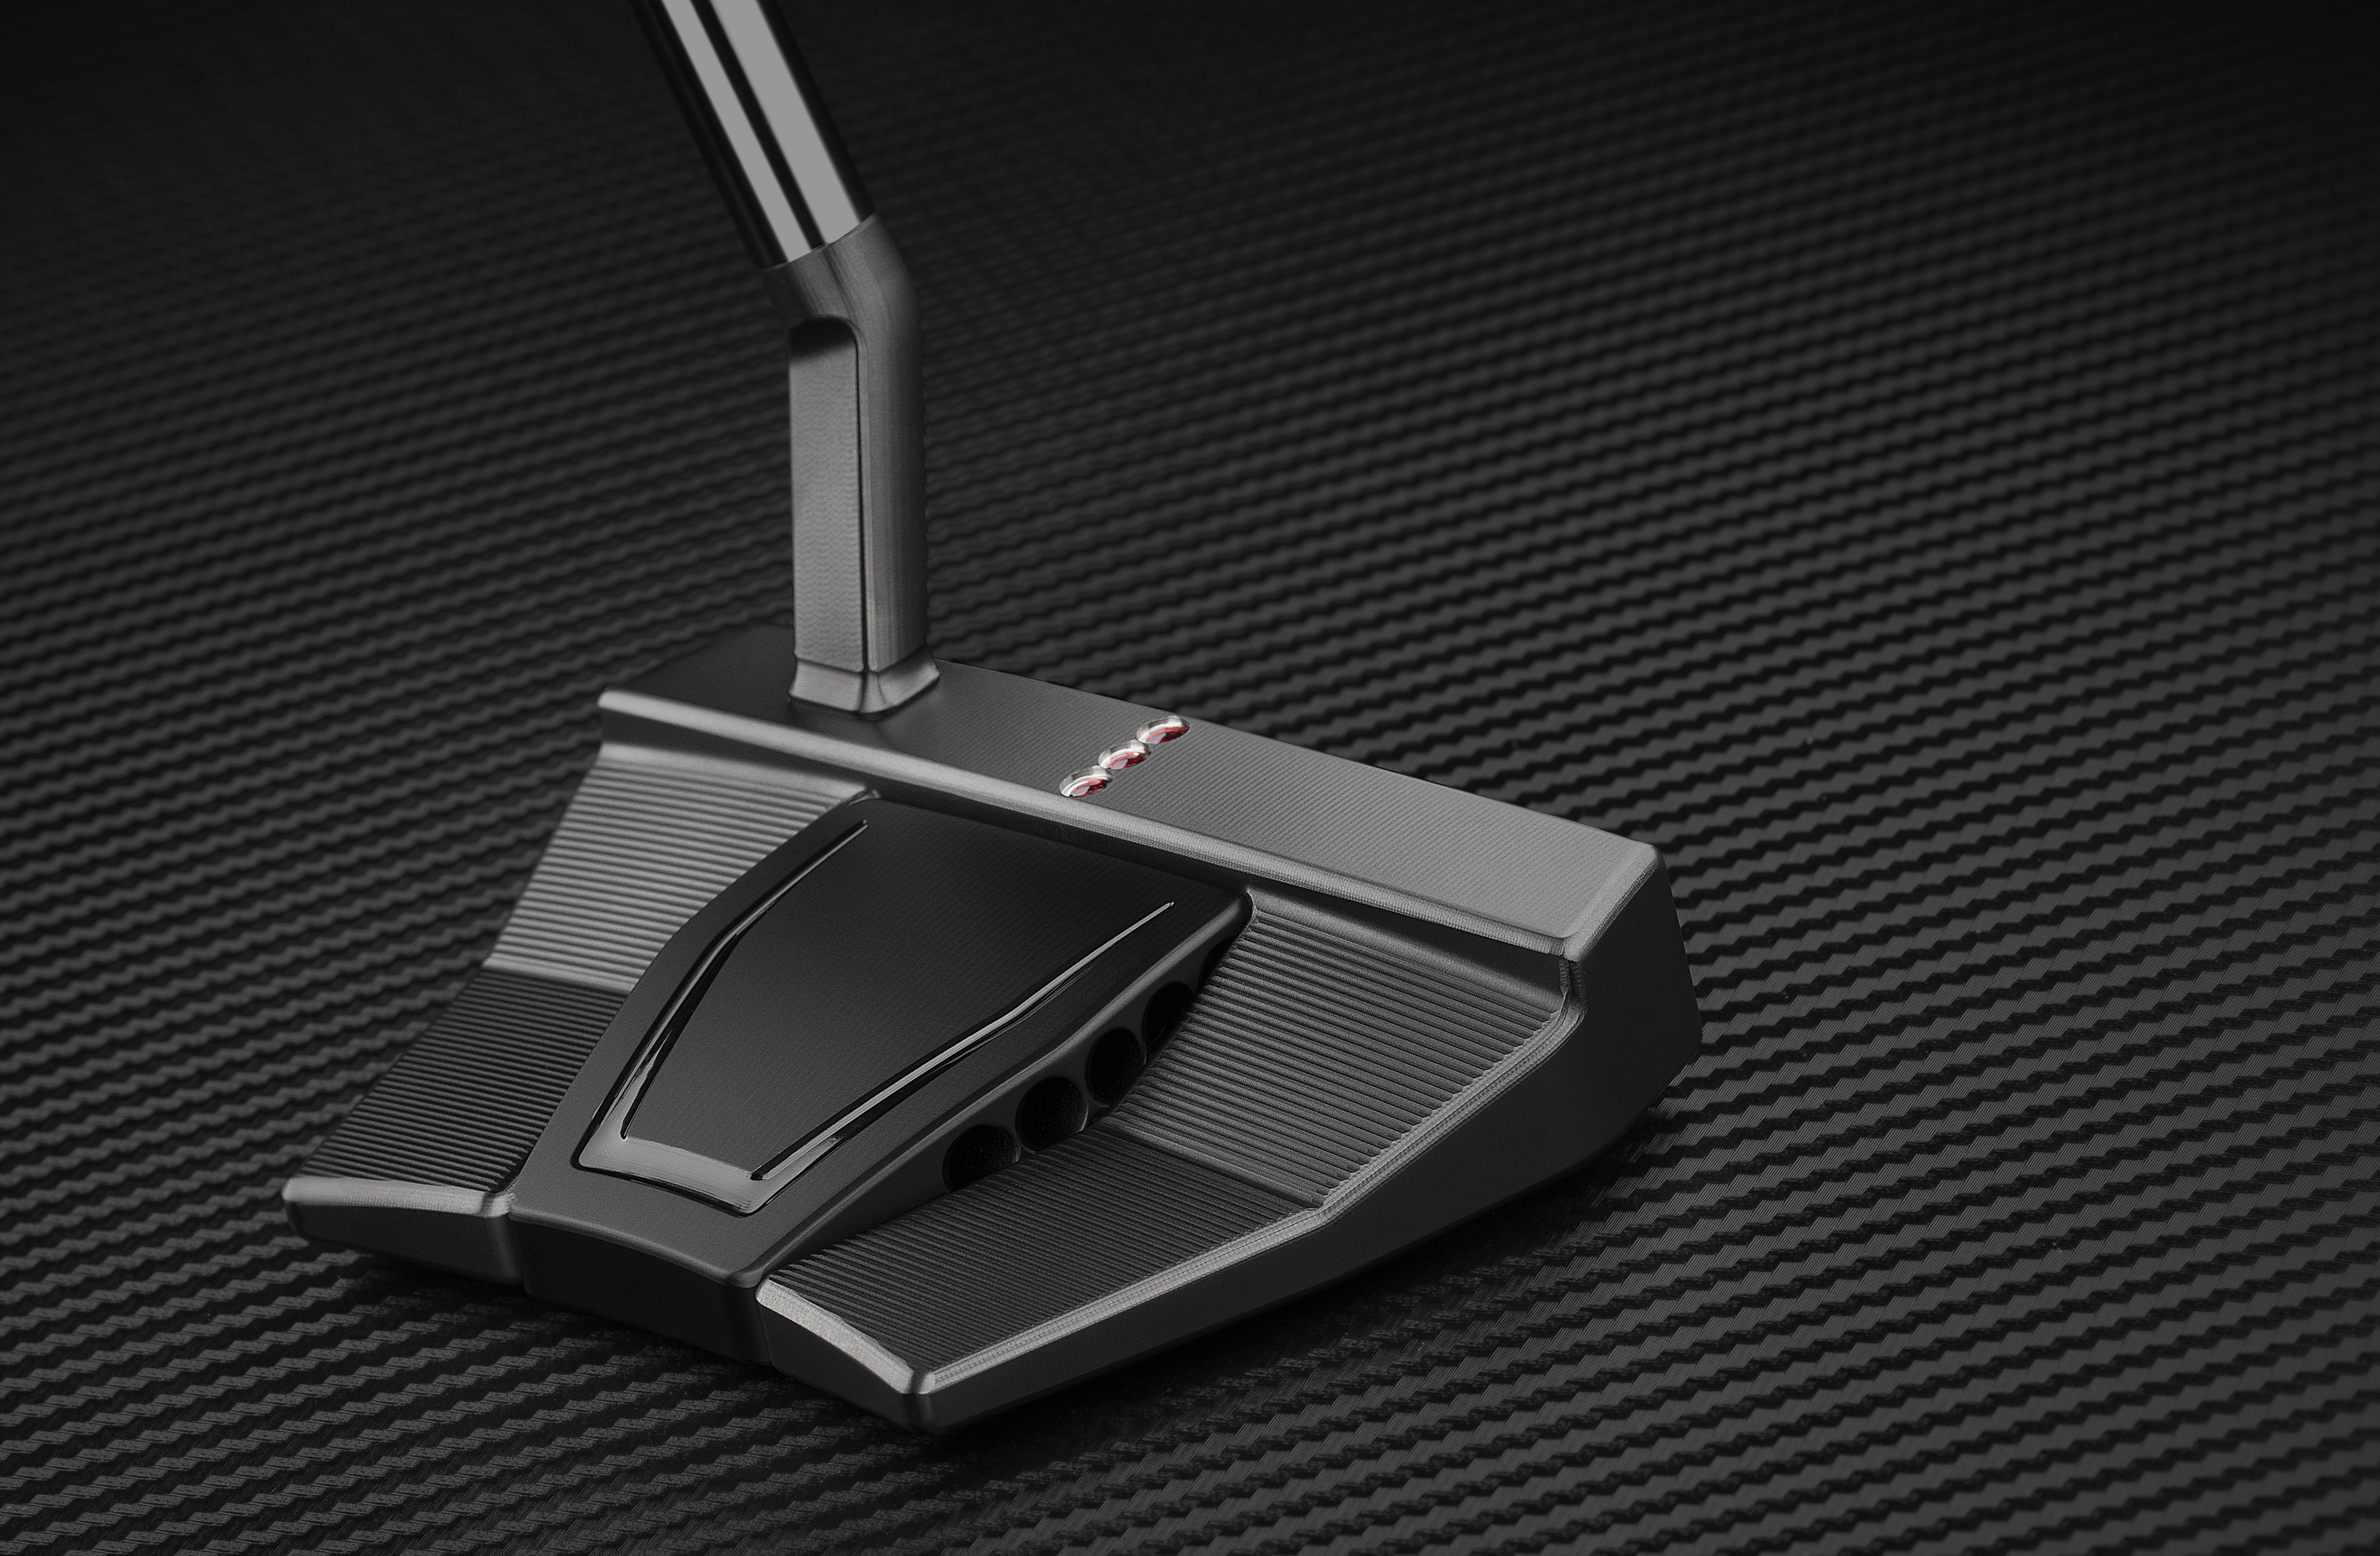 Scotty Cameron's latest limited-edition model comes in a badass all-black  look, Golf Equipment: Clubs, Balls, Bags